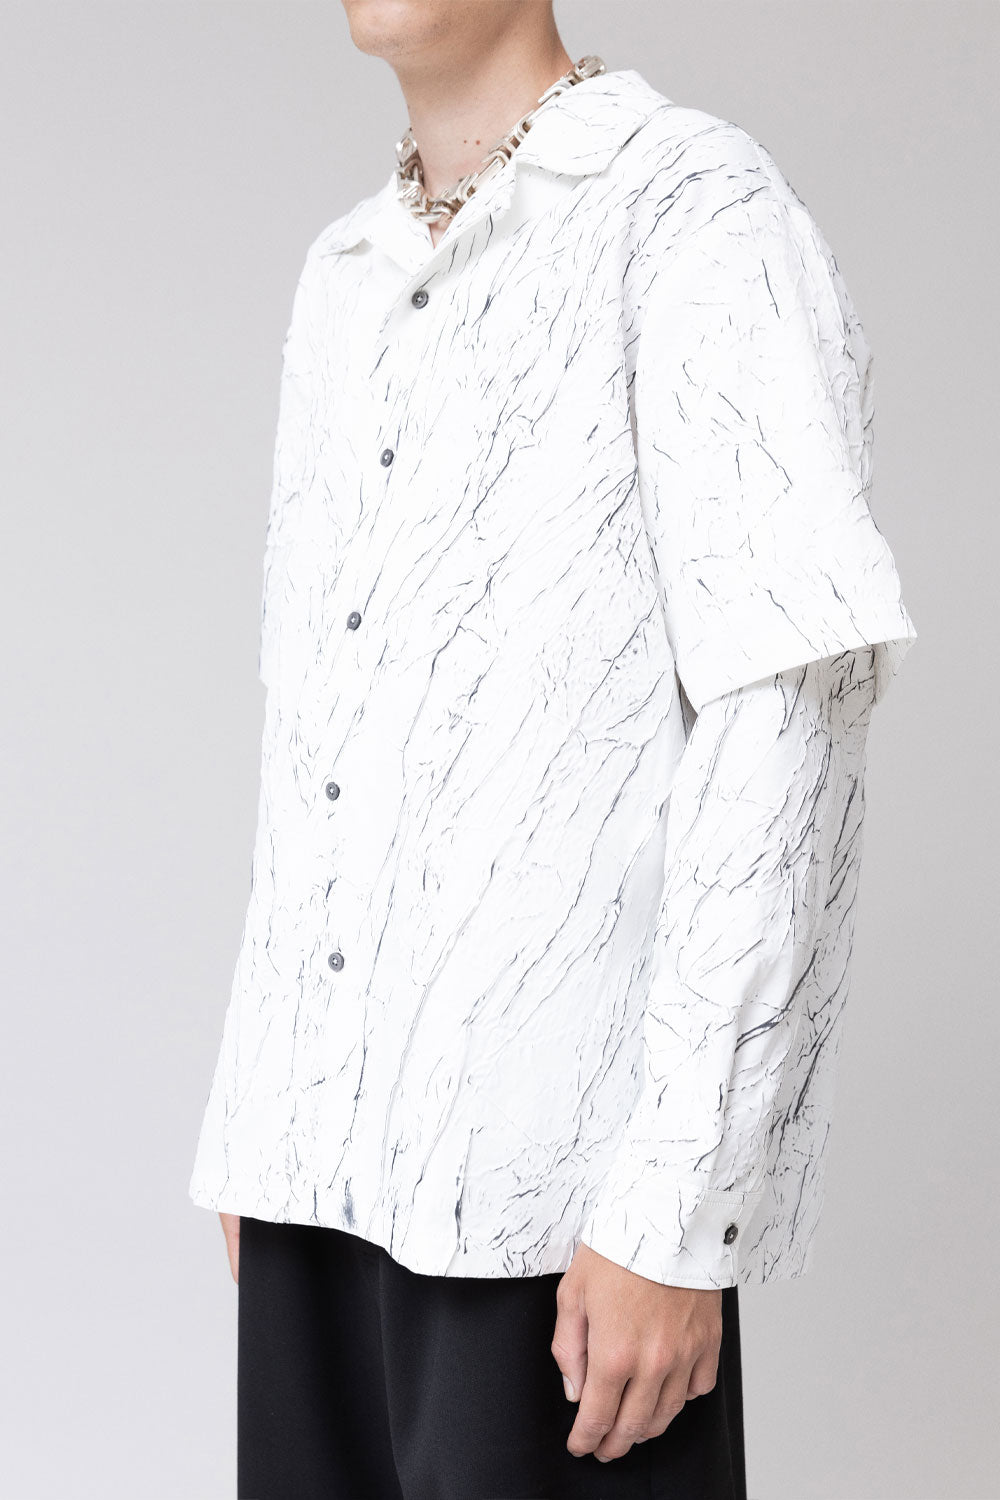 Buy the Han Kjobenhavn Wrinkle Two-Layered L/S Shirt in White at Intro. Spend £50 for free UK delivery. Official stockists. We ship worldwide.